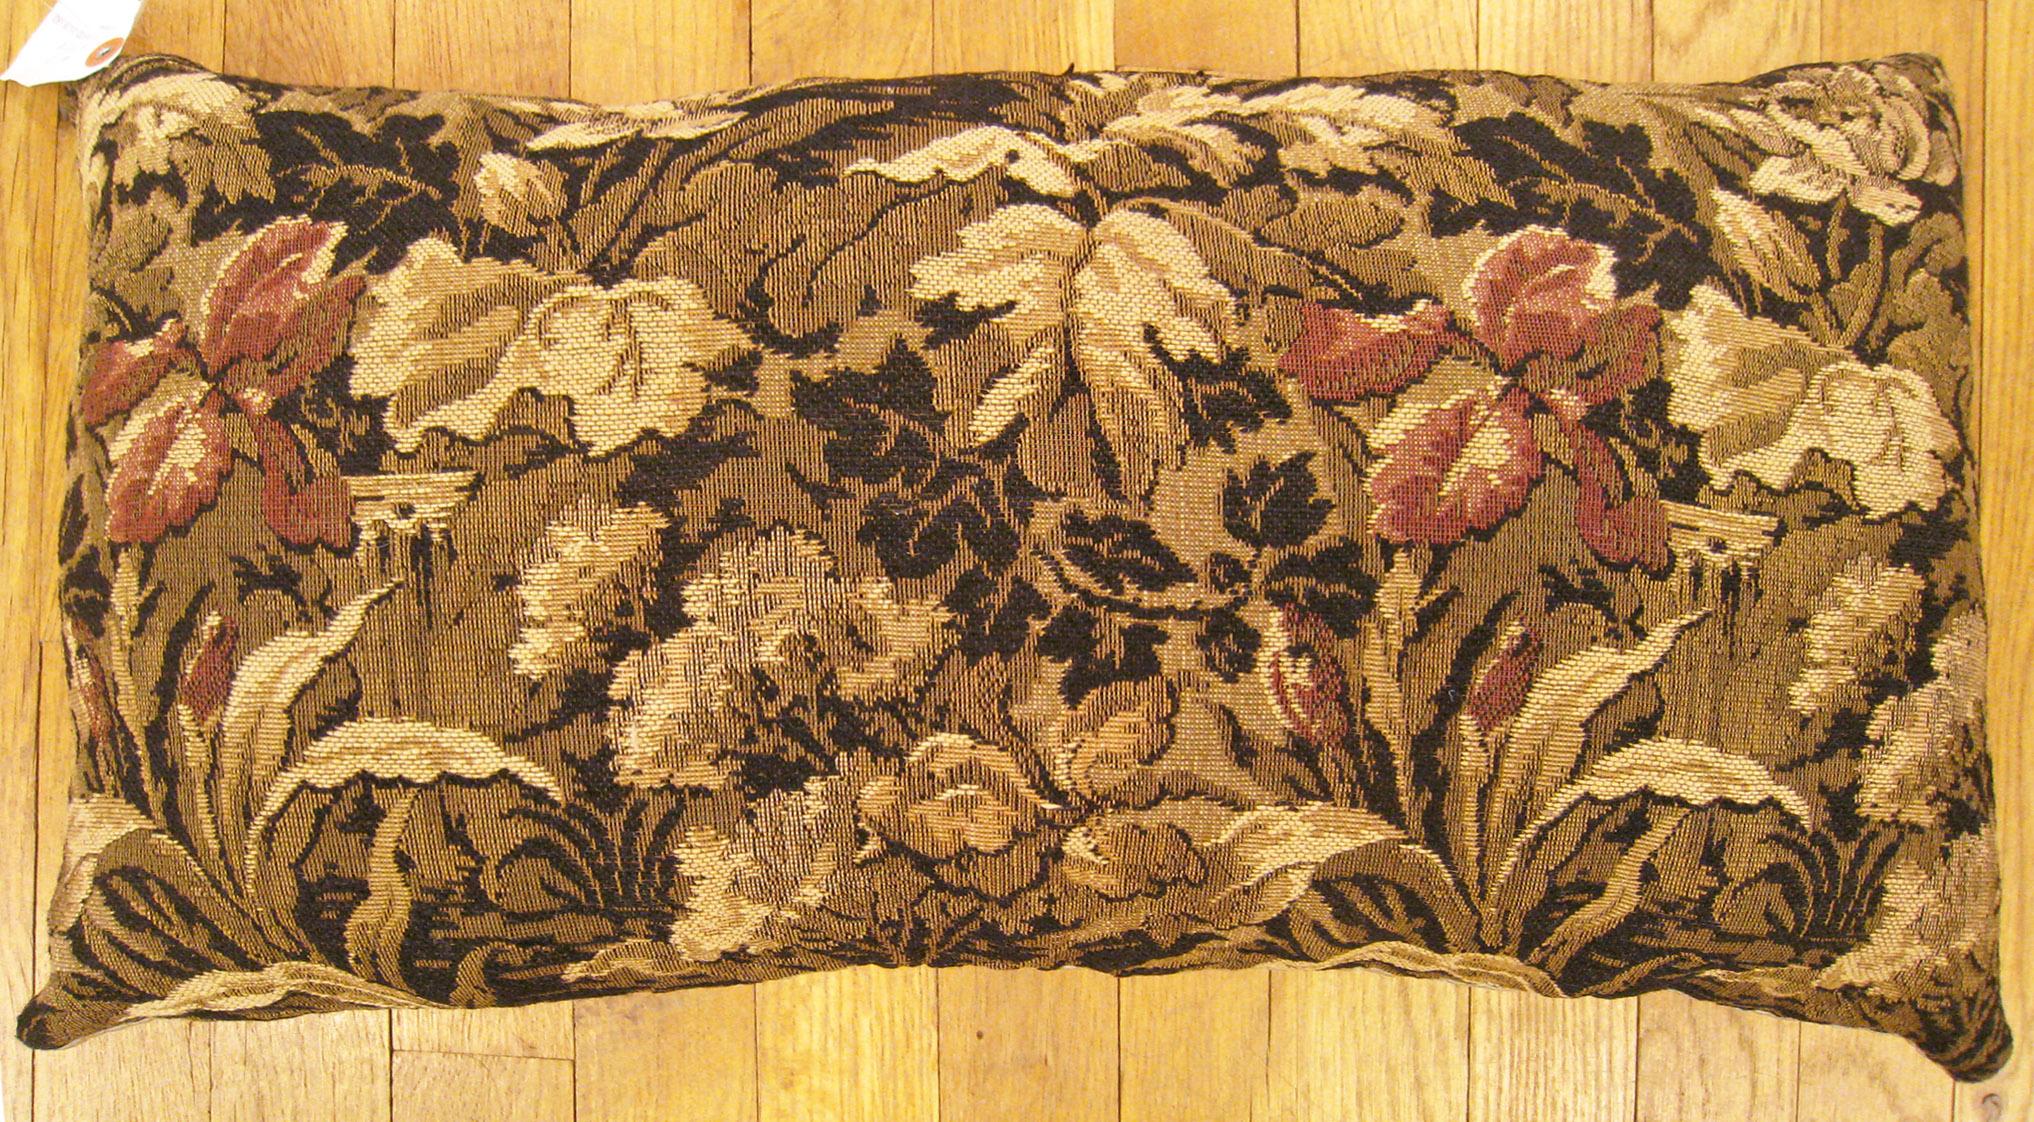 Antique Jacquard tapestry pillow; size 1'0” x 2'0”.

An antique decorative pillow with a garden design allover a light brown central field, size 1'0